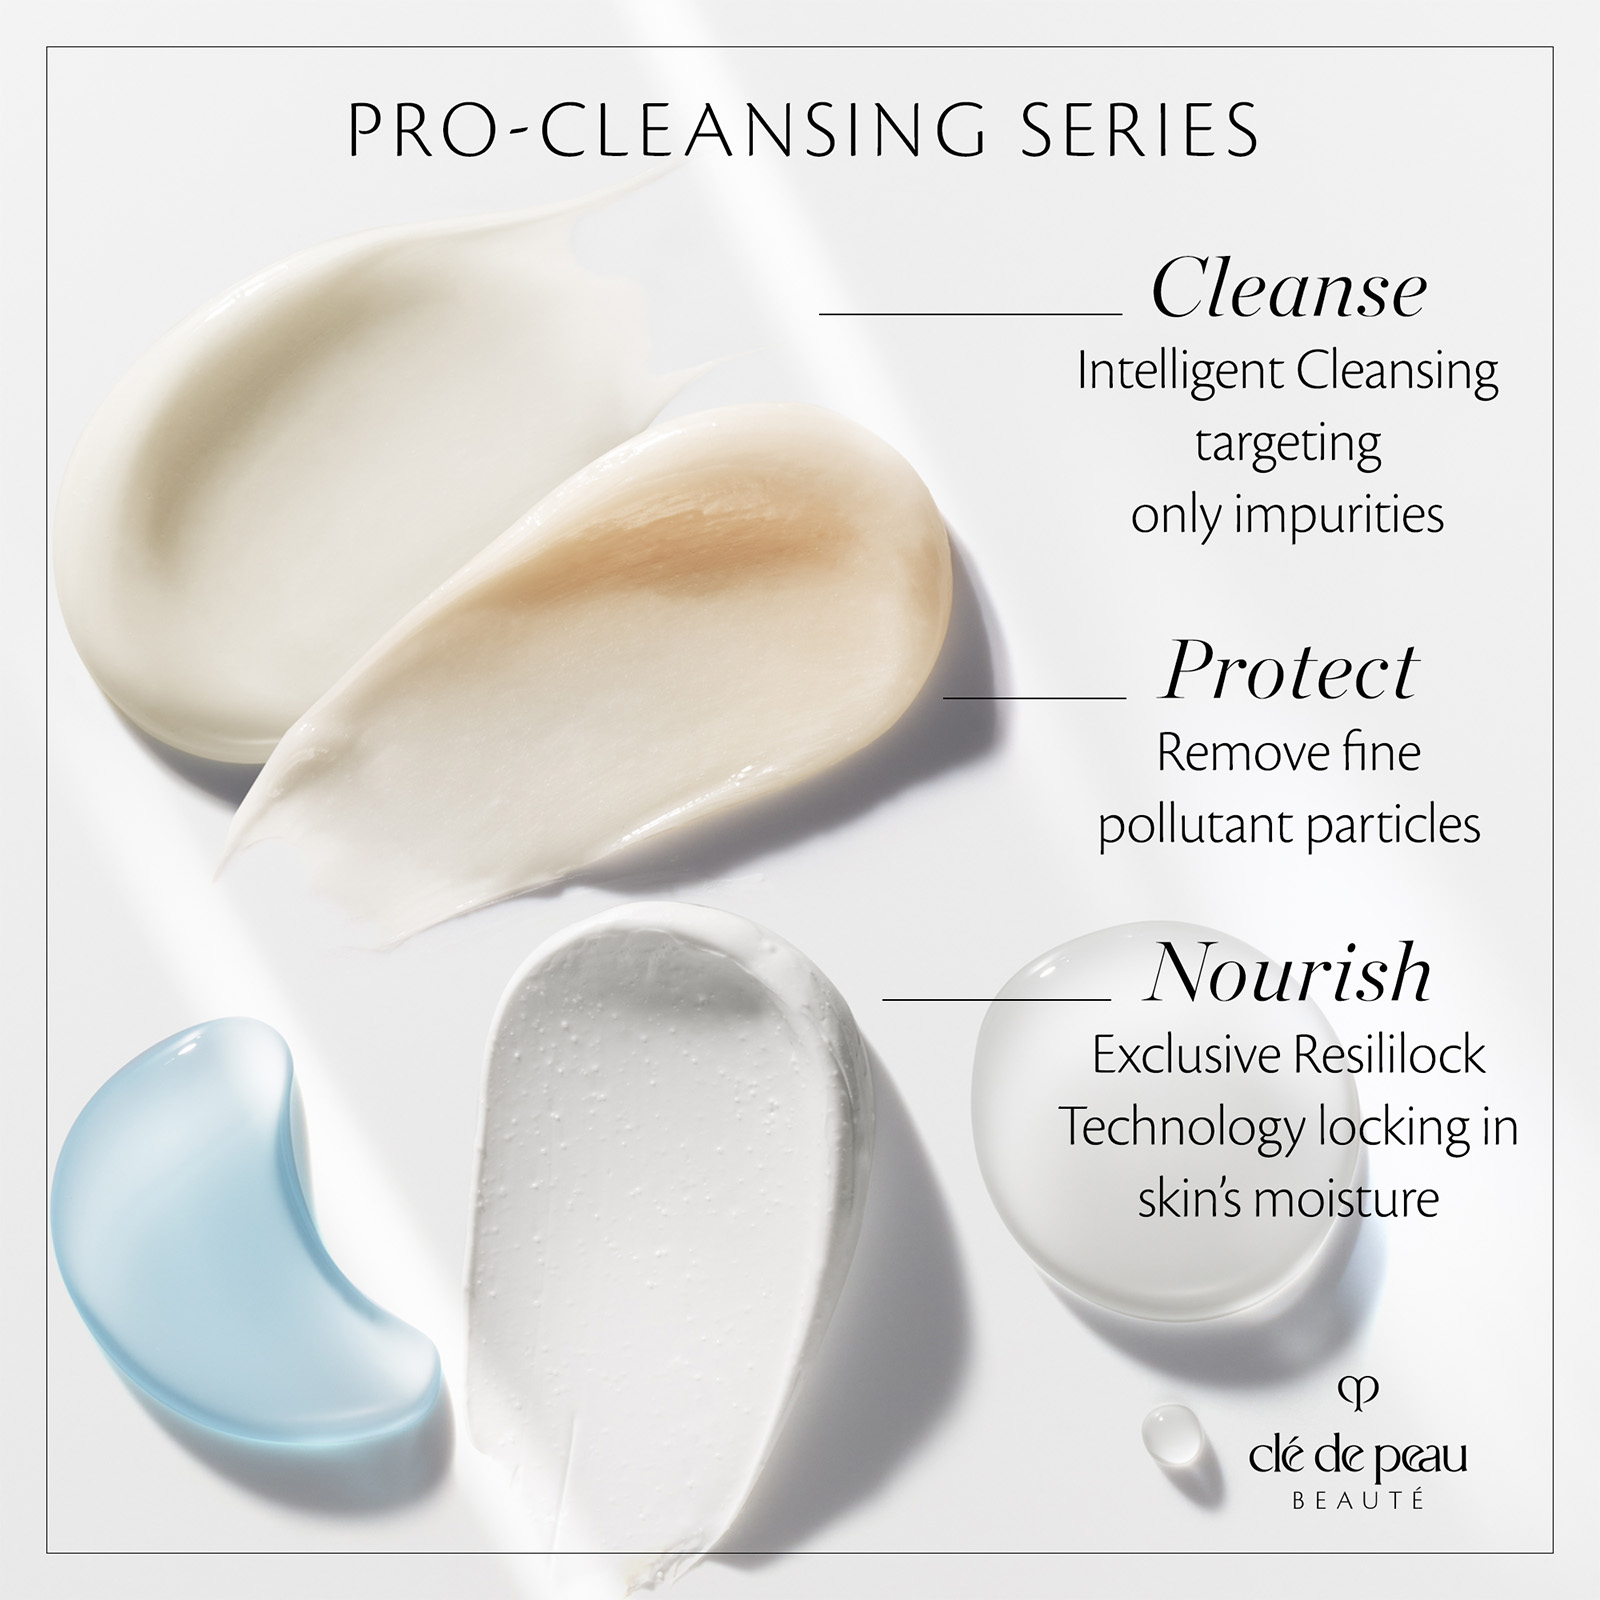 Pro-Cleansing series, cleanse, protect and nourish